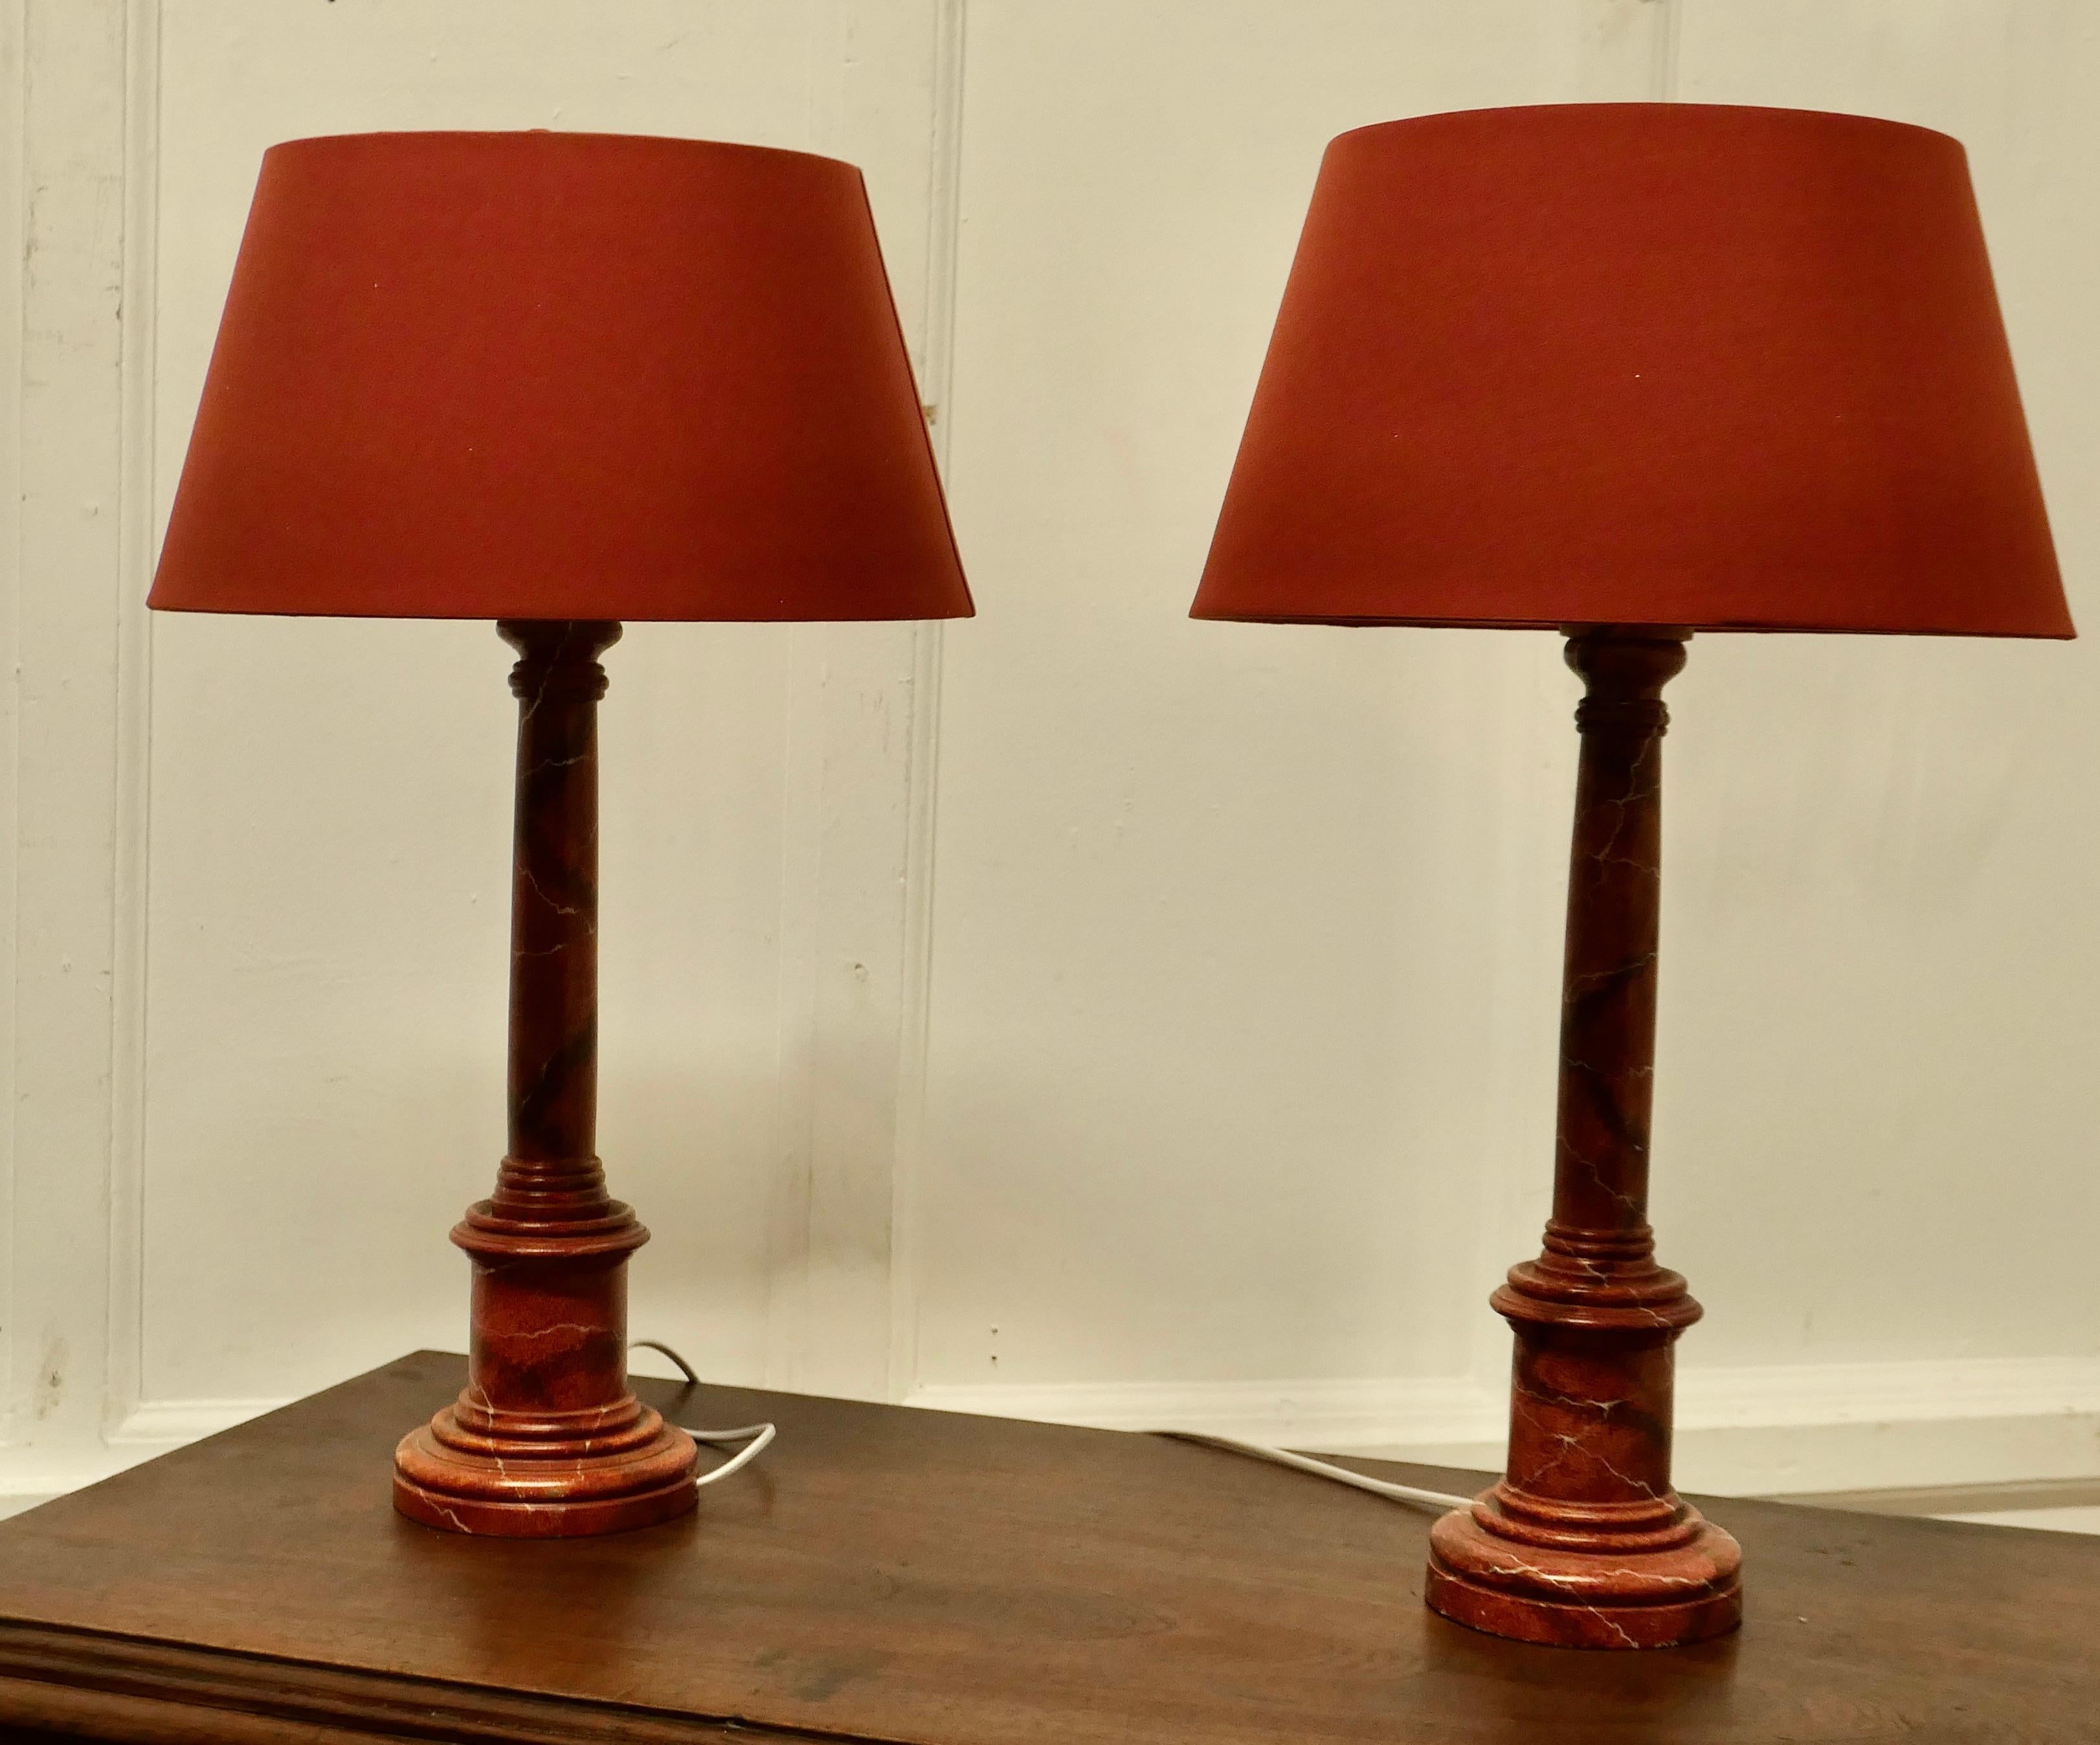 A Pair of Tall Simulated Marble Bedside Lamps with Shades    For Sale 2